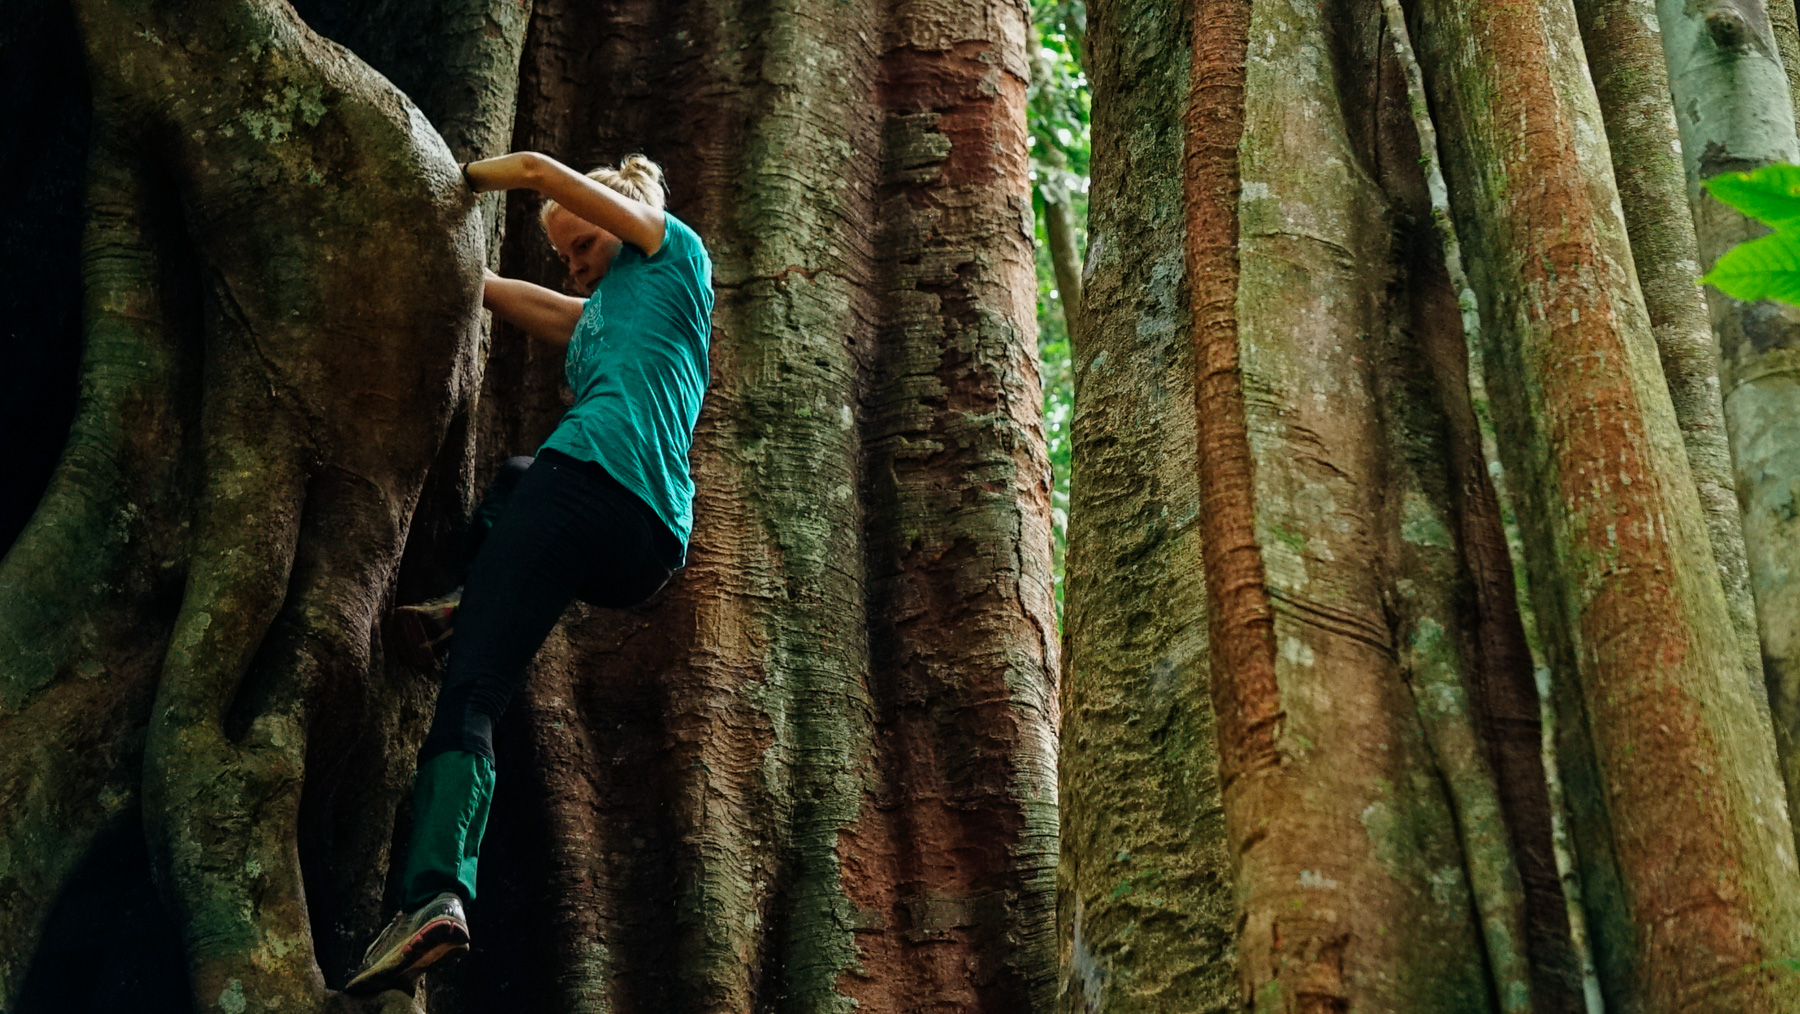 Giant old growth jungle tree in the Leuser